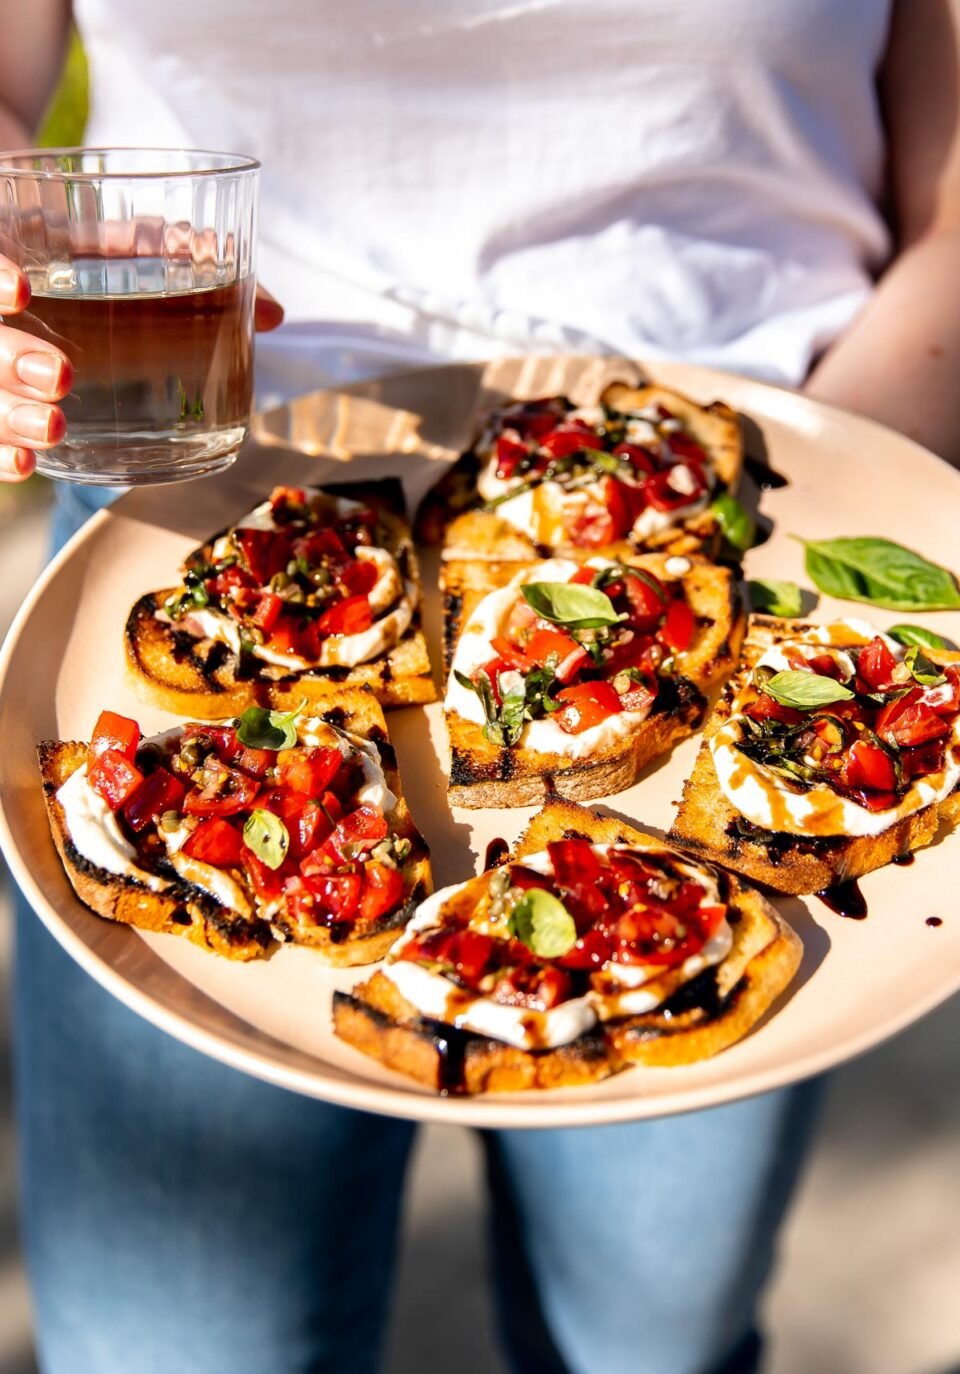 A woman holds a peach colored platter full of pieces of ricotta bruschetta served on grilled bread. The woman holds a clear glass full of white wine and wears jeans and a white tee shirt.